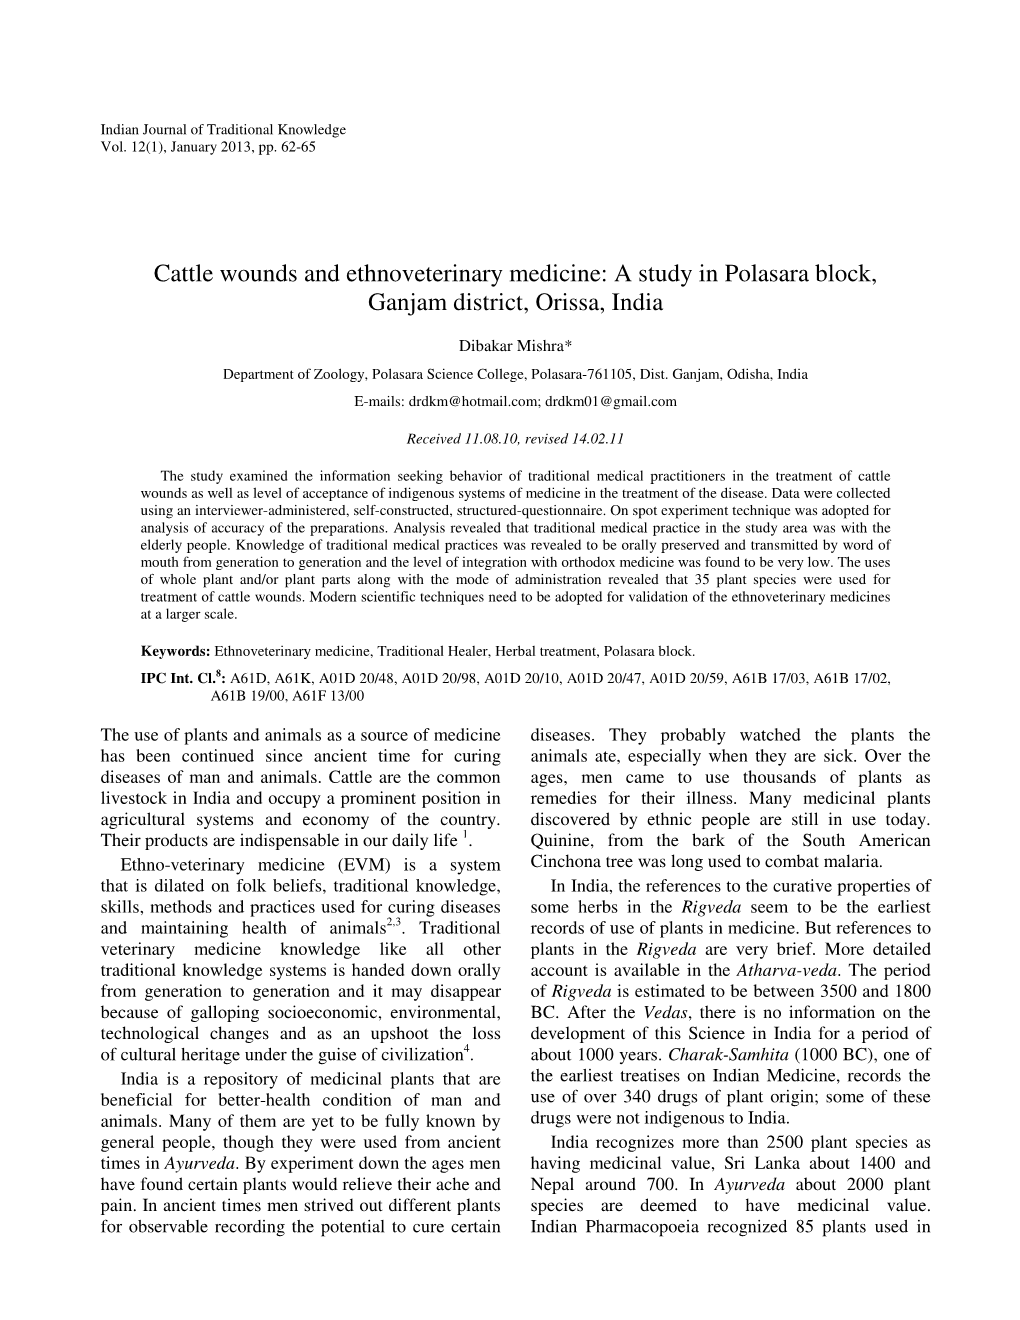 Cattle Wounds and Ethnoveterinary Medicine: a Study in Polasara Block, Ganjam District, Orissa, India